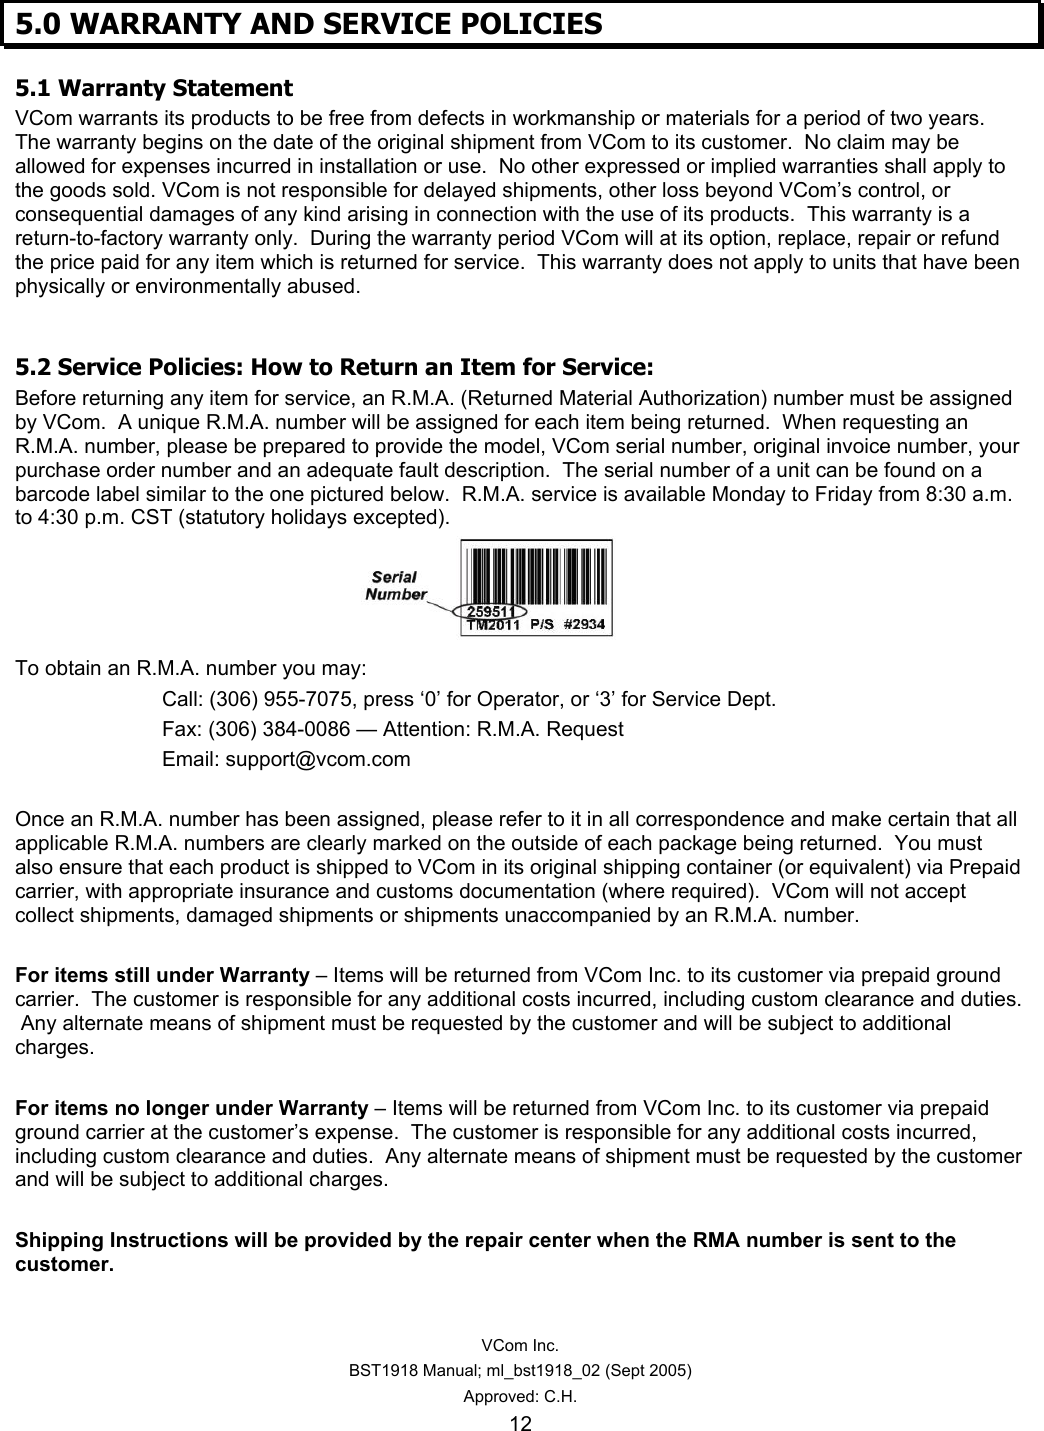   VCom Inc. BST1918 Manual; ml_bst1918_02 (Sept 2005) Approved: C.H. 12 5.0 WARRANTY AND SERVICE POLICIES 5.1 Warranty Statement VCom warrants its products to be free from defects in workmanship or materials for a period of two years.  The warranty begins on the date of the original shipment from VCom to its customer.  No claim may be allowed for expenses incurred in installation or use.  No other expressed or implied warranties shall apply to the goods sold. VCom is not responsible for delayed shipments, other loss beyond VCom’s control, or consequential damages of any kind arising in connection with the use of its products.  This warranty is a return-to-factory warranty only.  During the warranty period VCom will at its option, replace, repair or refund the price paid for any item which is returned for service.  This warranty does not apply to units that have been physically or environmentally abused.  5.2 Service Policies: How to Return an Item for Service: Before returning any item for service, an R.M.A. (Returned Material Authorization) number must be assigned by VCom.  A unique R.M.A. number will be assigned for each item being returned.  When requesting an R.M.A. number, please be prepared to provide the model, VCom serial number, original invoice number, your purchase order number and an adequate fault description.  The serial number of a unit can be found on a barcode label similar to the one pictured below.  R.M.A. service is available Monday to Friday from 8:30 a.m. to 4:30 p.m. CST (statutory holidays excepted).     To obtain an R.M.A. number you may: Call: (306) 955-7075, press ‘0’ for Operator, or ‘3’ for Service Dept. Fax: (306) 384-0086 — Attention: R.M.A. Request Email: support@vcom.com  Once an R.M.A. number has been assigned, please refer to it in all correspondence and make certain that all applicable R.M.A. numbers are clearly marked on the outside of each package being returned.  You must also ensure that each product is shipped to VCom in its original shipping container (or equivalent) via Prepaid carrier, with appropriate insurance and customs documentation (where required).  VCom will not accept collect shipments, damaged shipments or shipments unaccompanied by an R.M.A. number.  For items still under Warranty – Items will be returned from VCom Inc. to its customer via prepaid ground carrier.  The customer is responsible for any additional costs incurred, including custom clearance and duties.  Any alternate means of shipment must be requested by the customer and will be subject to additional charges.   For items no longer under Warranty – Items will be returned from VCom Inc. to its customer via prepaid ground carrier at the customer’s expense.  The customer is responsible for any additional costs incurred, including custom clearance and duties.  Any alternate means of shipment must be requested by the customer and will be subject to additional charges.  Shipping Instructions will be provided by the repair center when the RMA number is sent to the customer. 